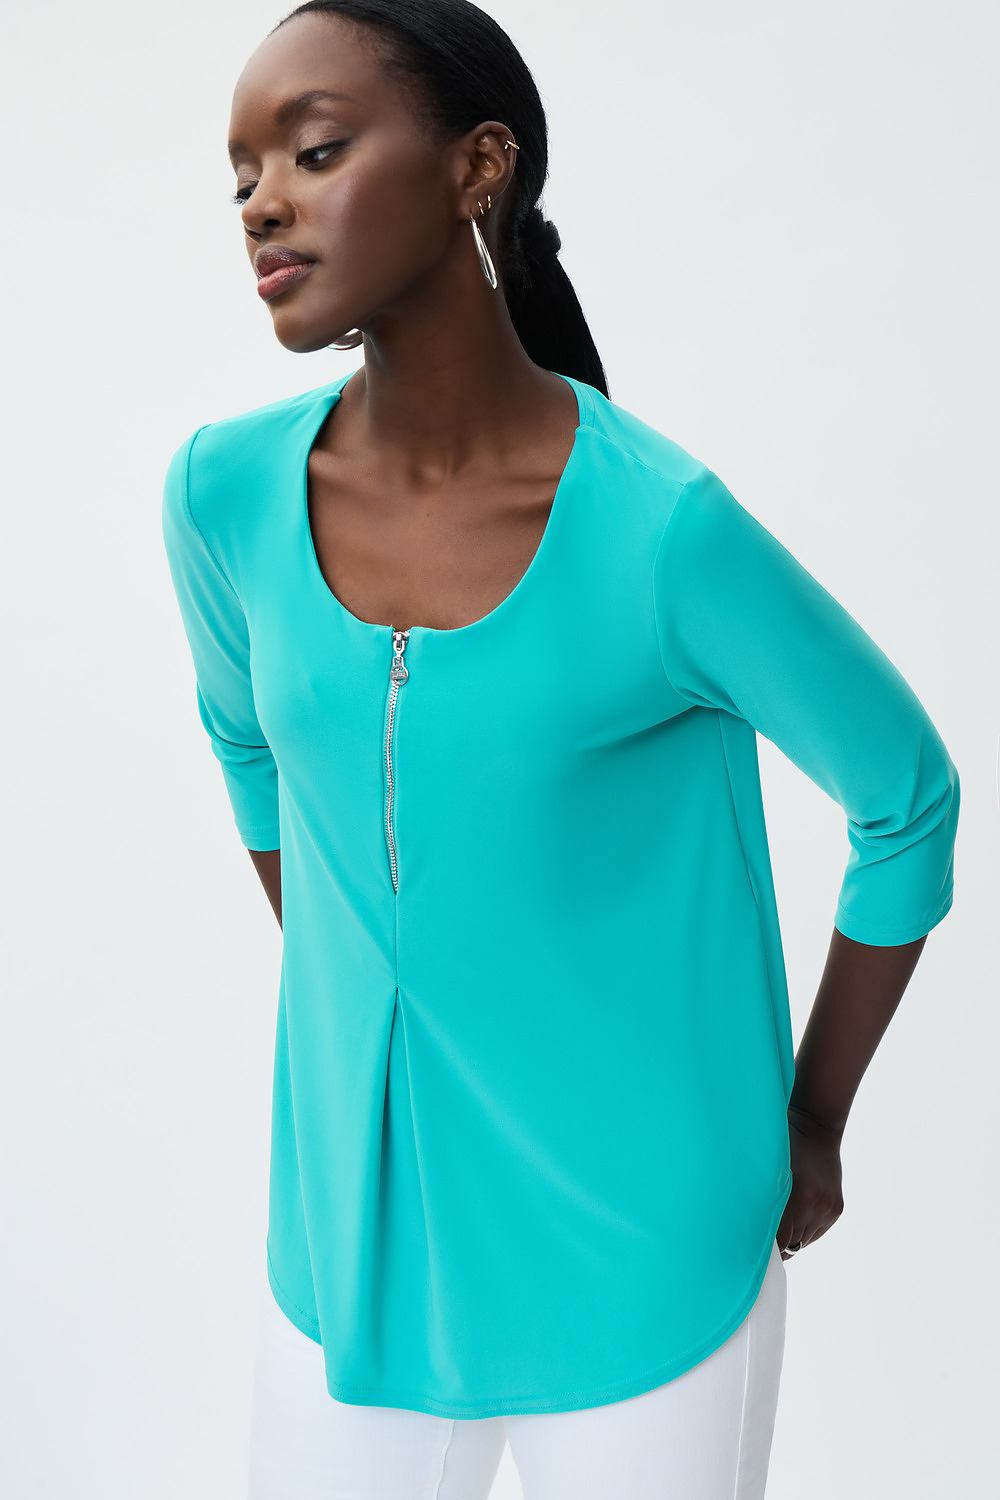 Zip Front 3/4 Sleeve Top Style 231131. Palm Springs